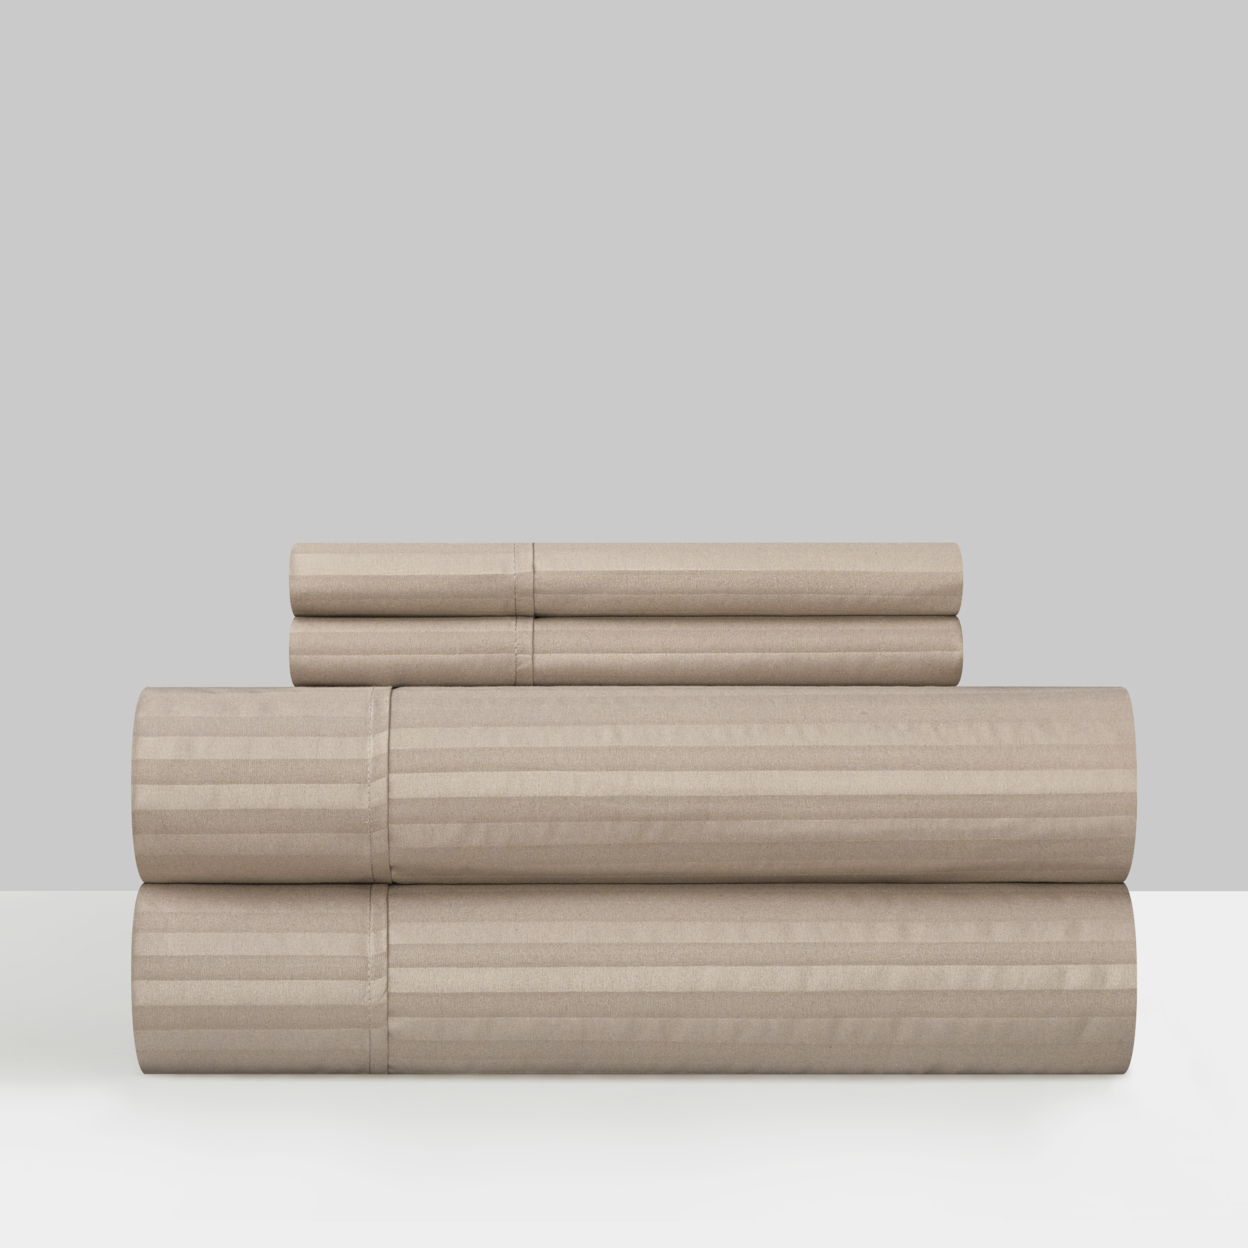 Shina 3 Or 4 Piece Sheet Set Solid Color Striped Pattern Technique - Taupe, King